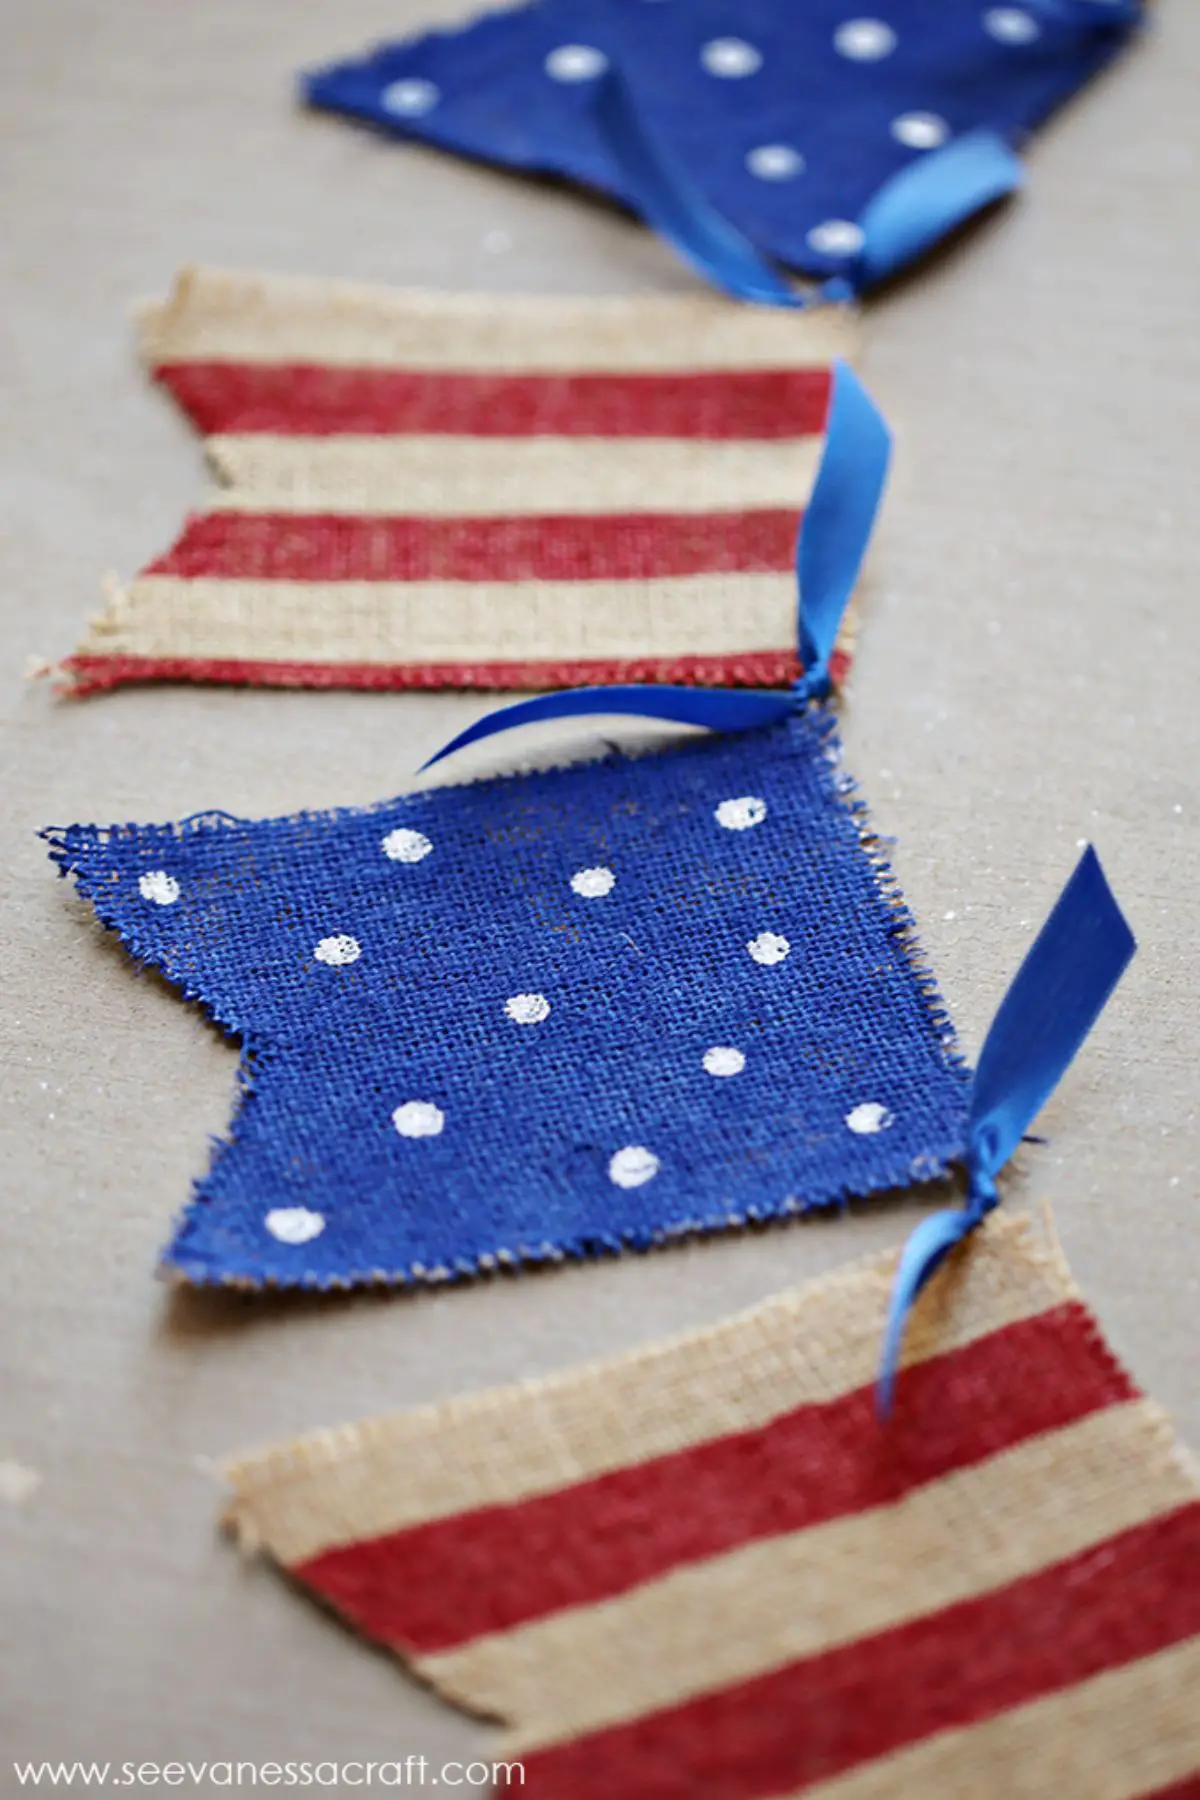 Making a craft is one of the 4th of July traditions in this post.